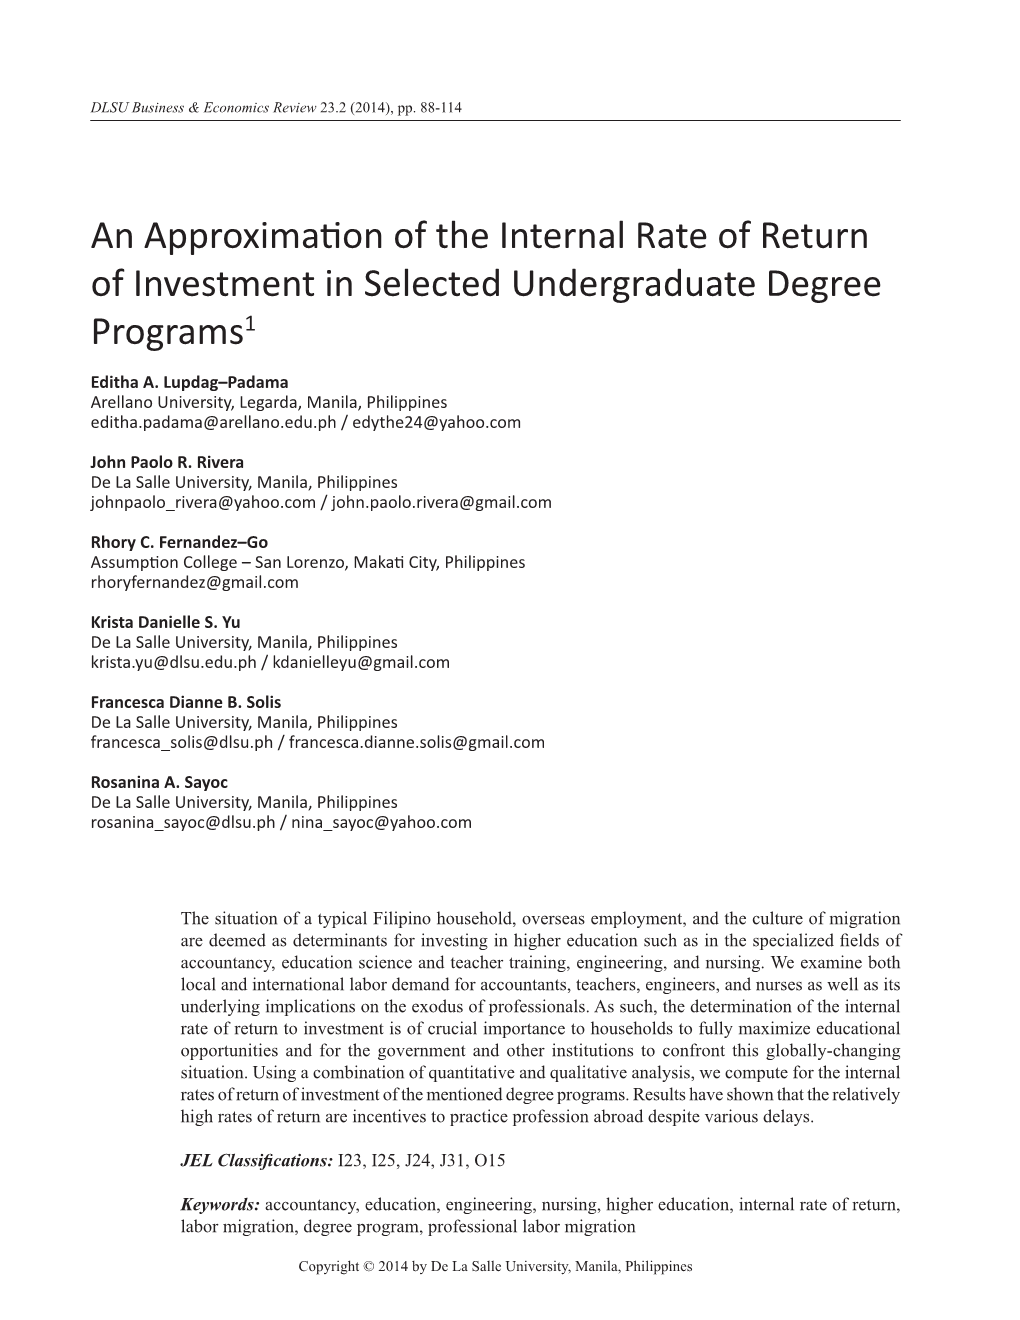 An Approximation of the Internal Rate of Return of Investment in Selected Undergraduate Degree Programs1